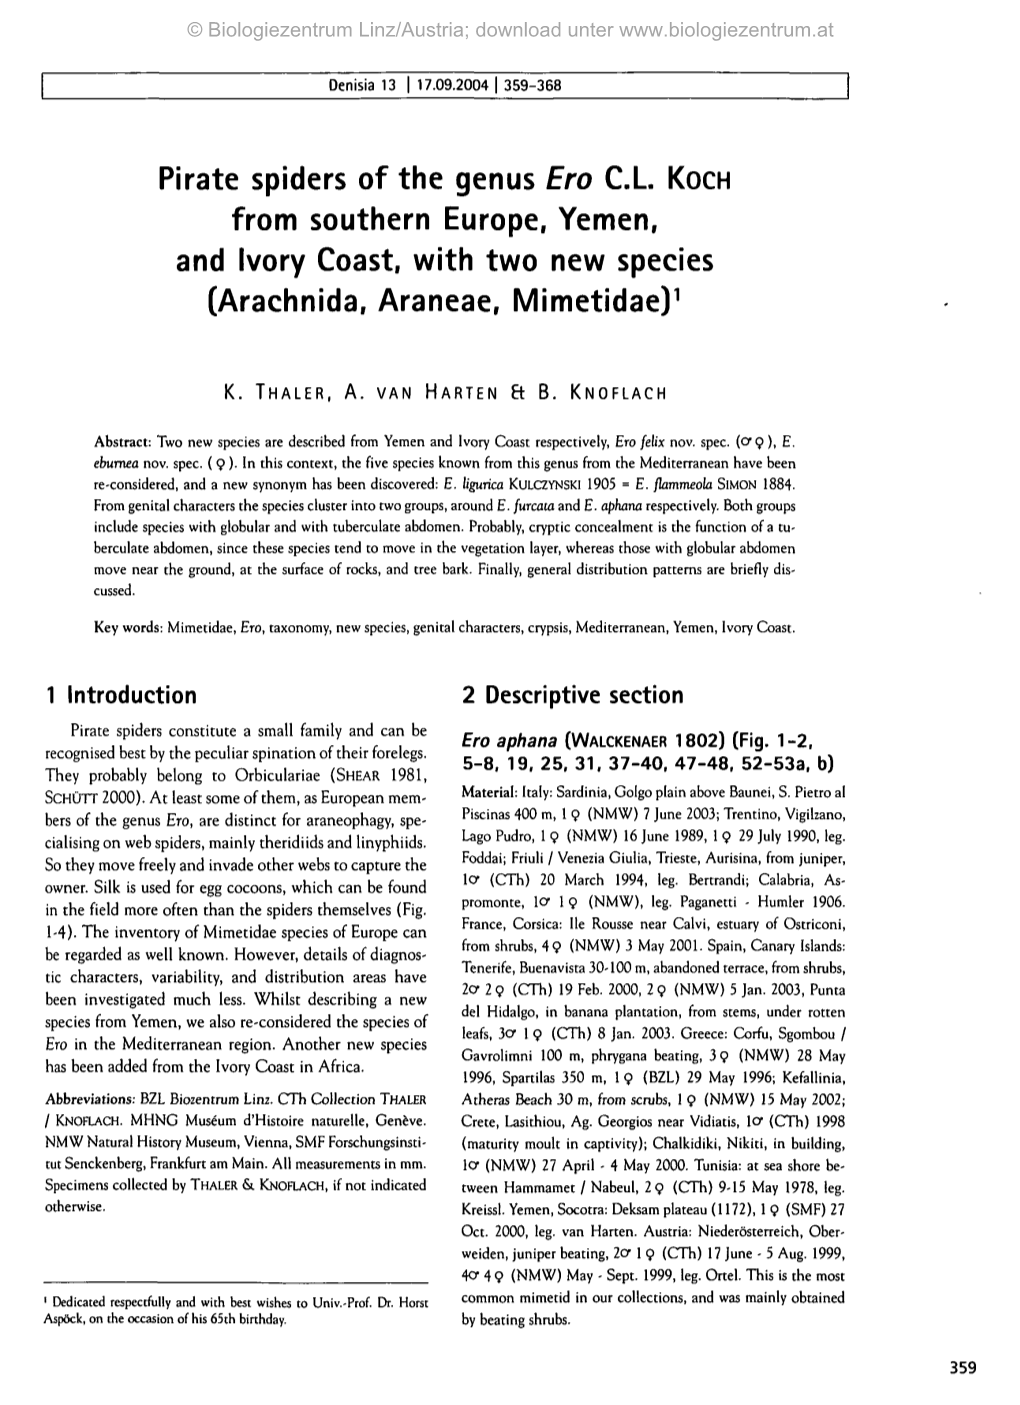 Pirate Spiders of the Genus Ero C.L KOCH from Southern Europe, Yemen, and Ivory Coast, with Two New Species (Arachnida, Araneae, Mimetidae)1